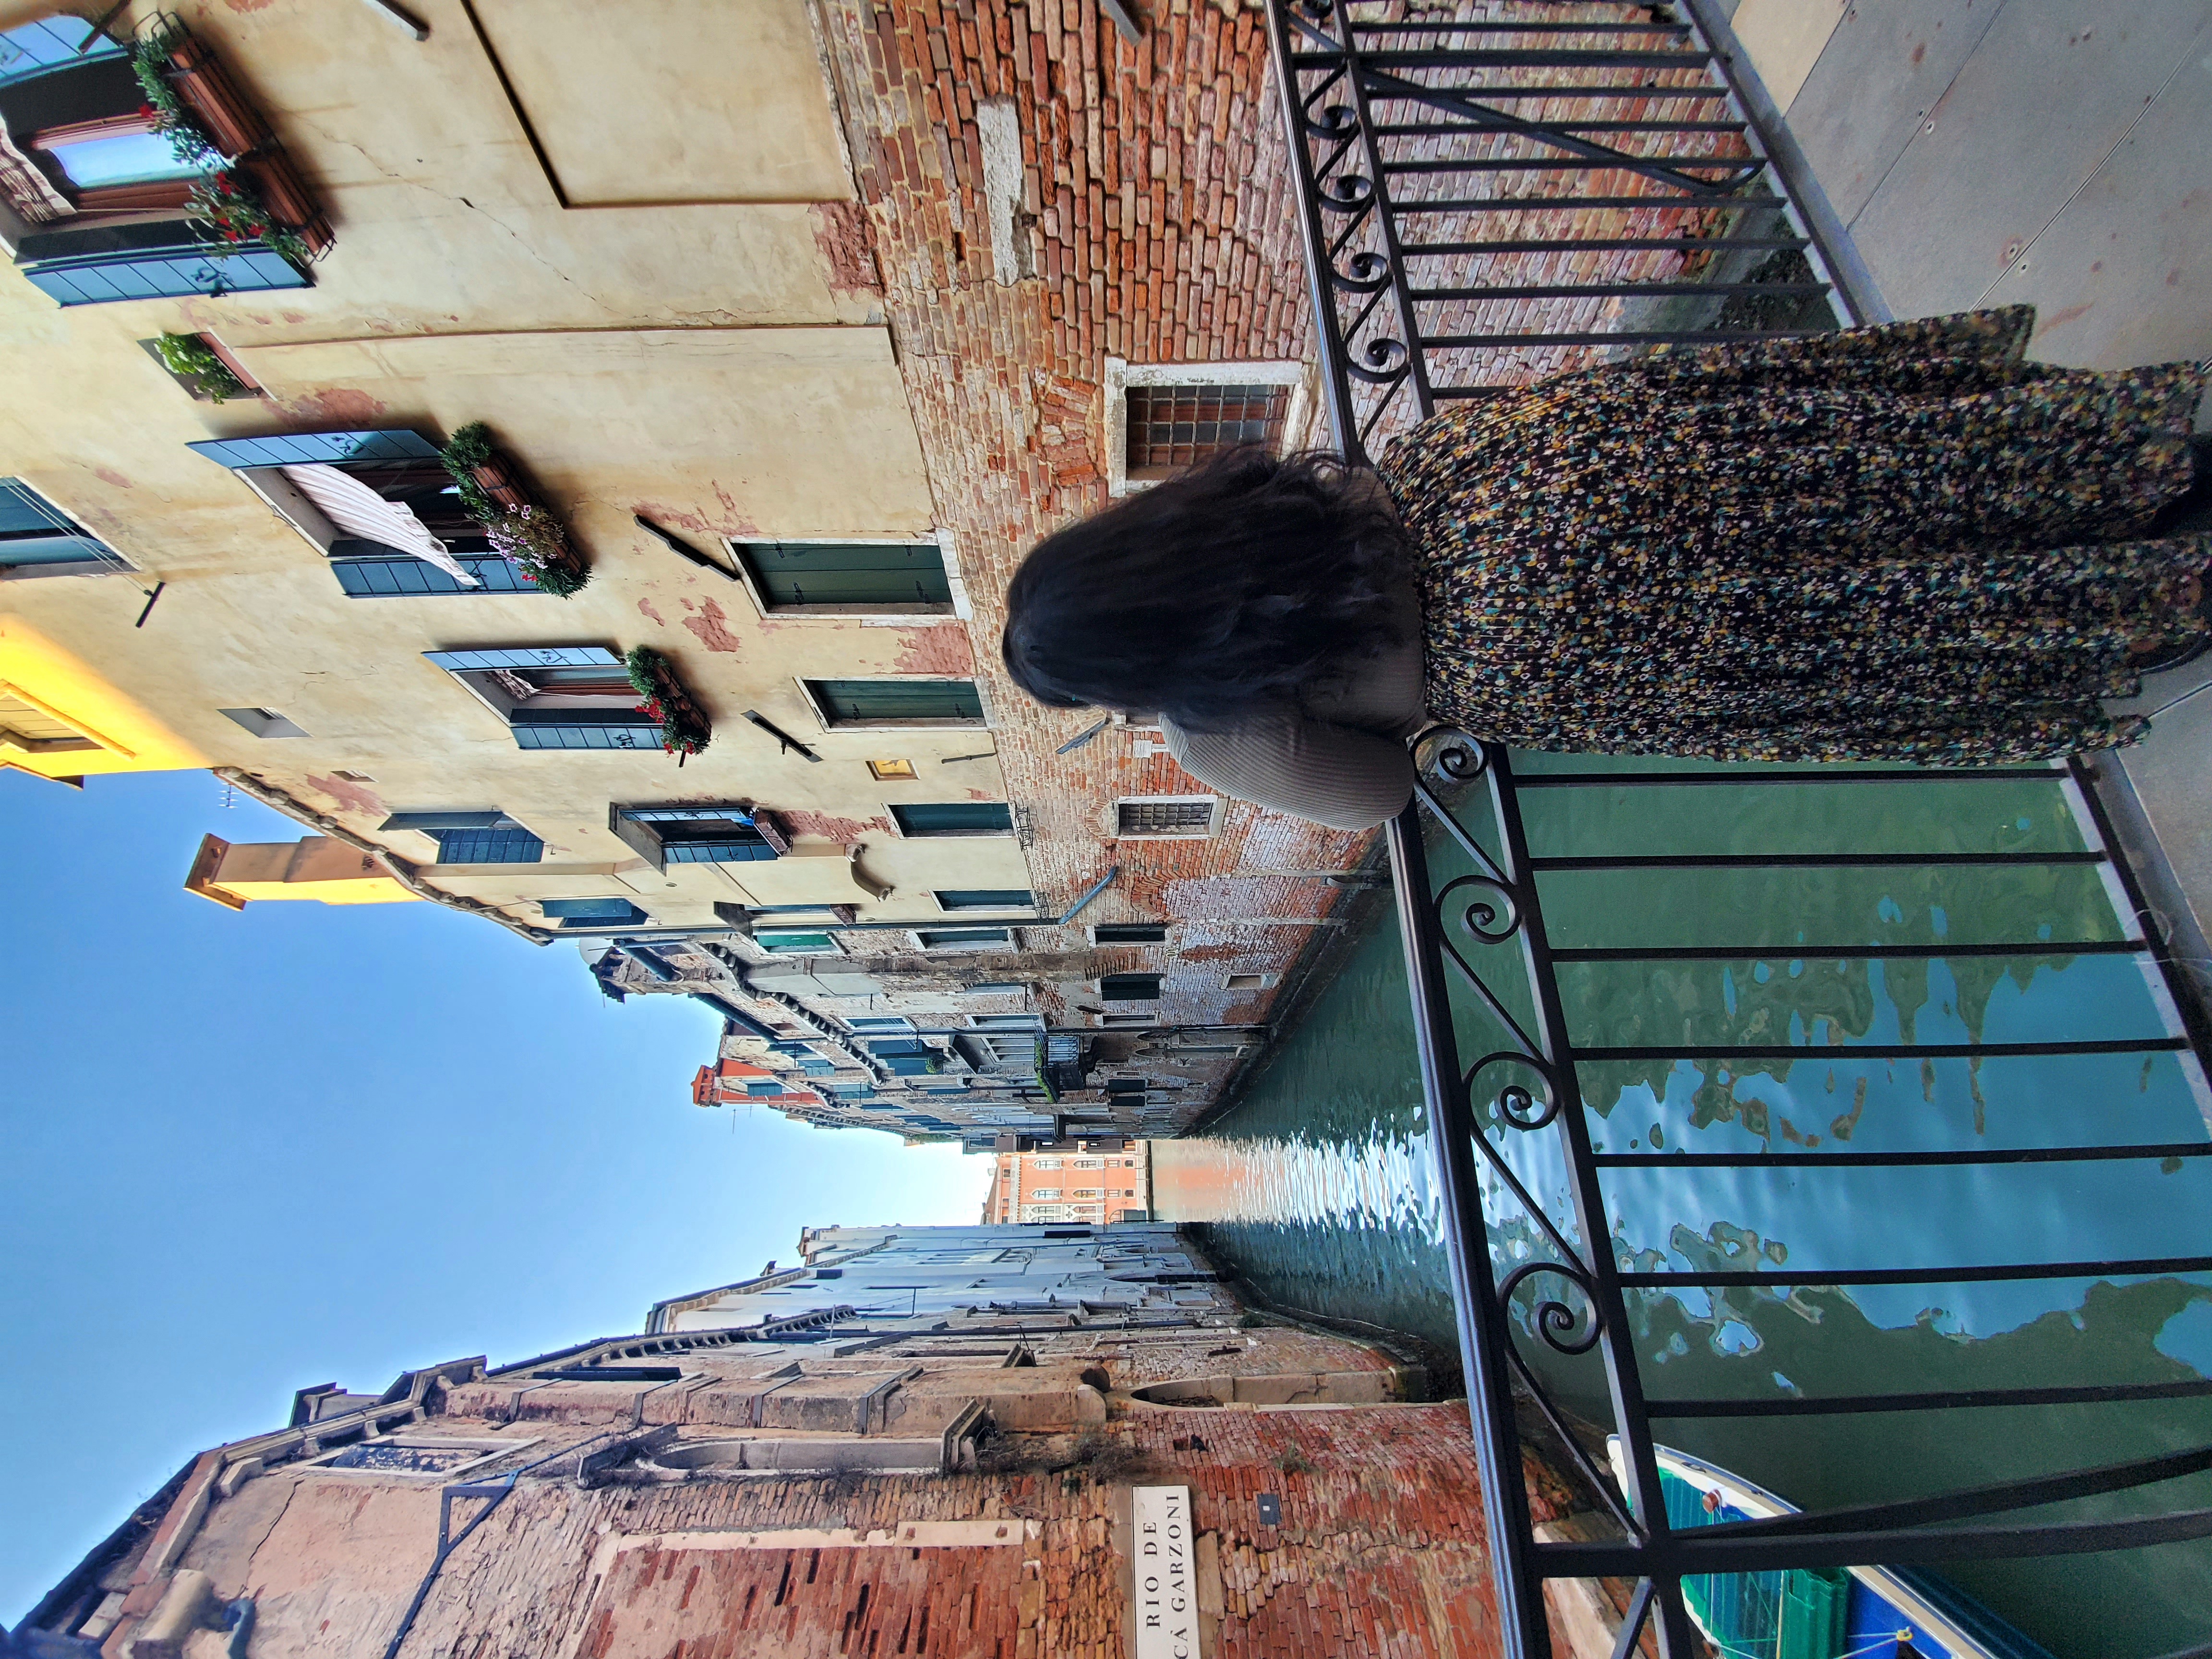 This photo was taken in Venice, Italy! It was my first trip while studying abroad in Italy!